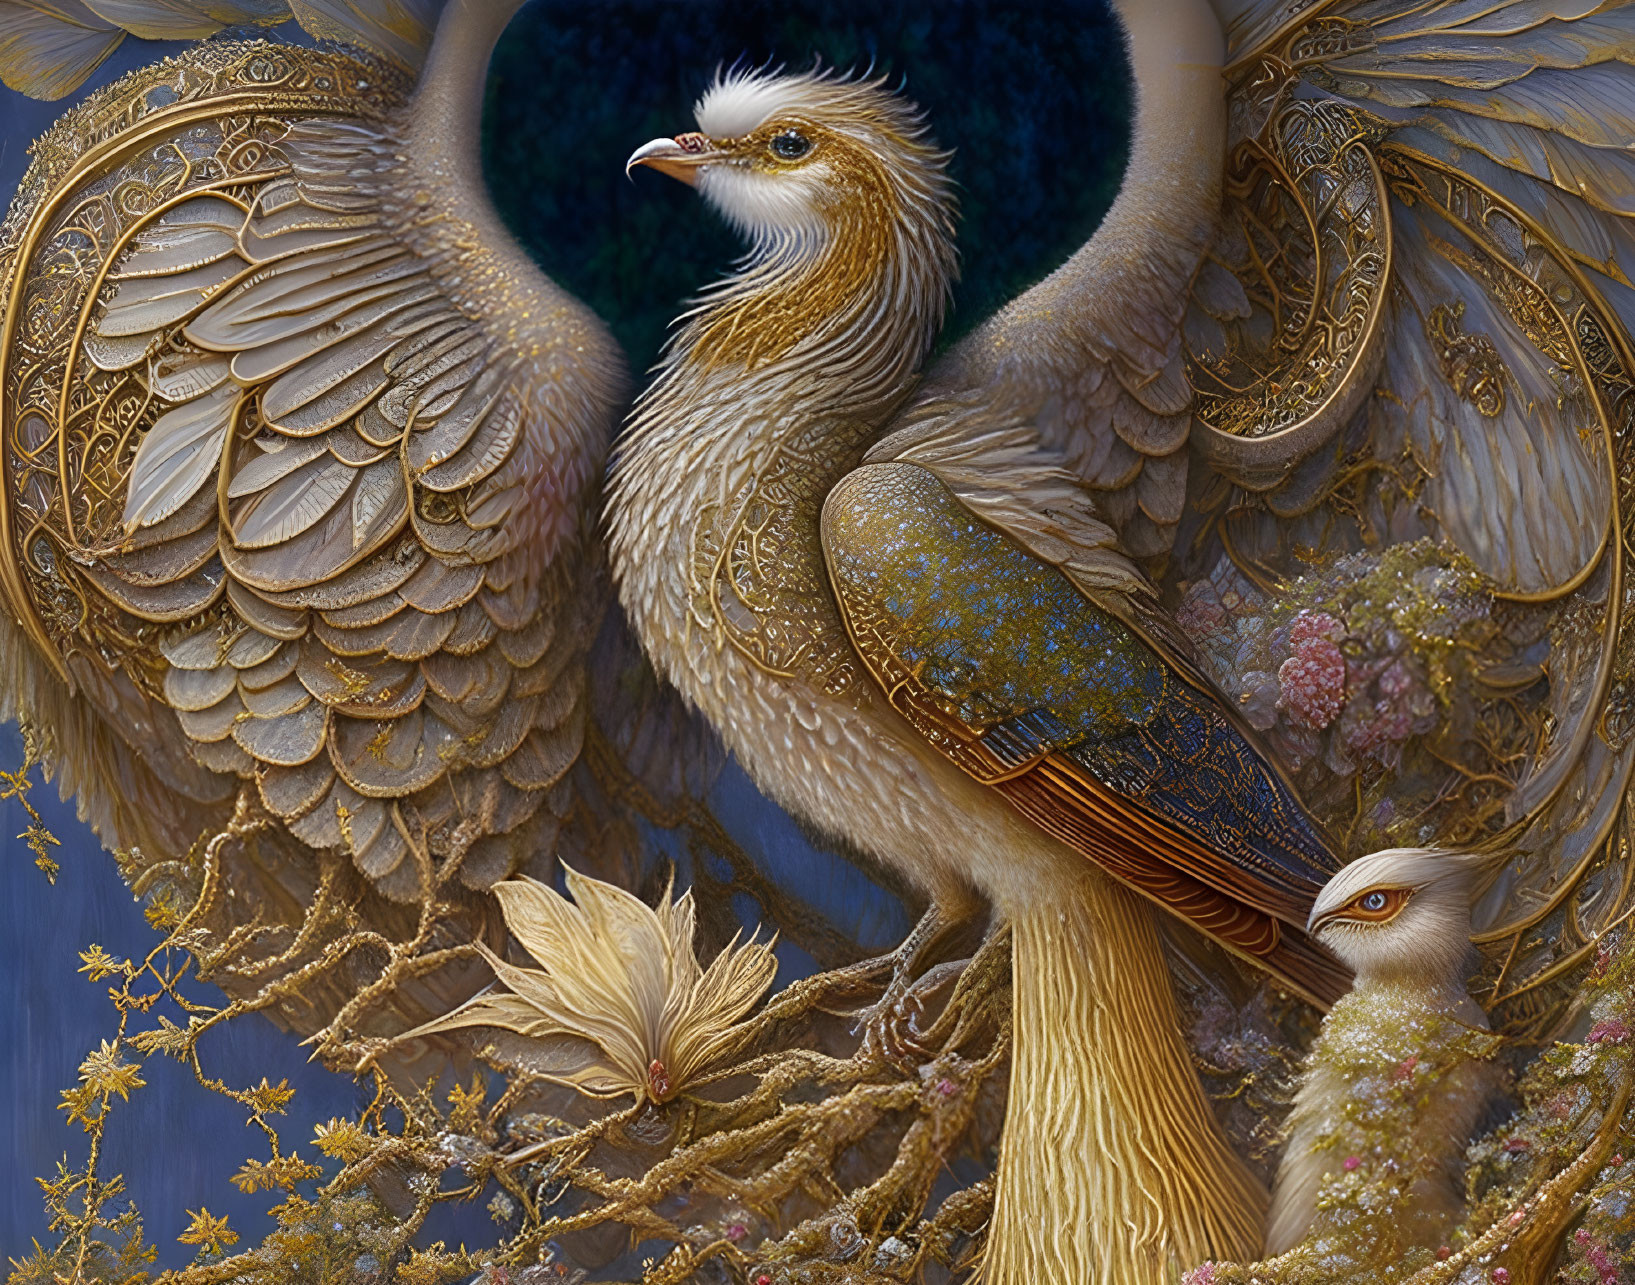 Ornate fantastical bird artwork with intricate feather patterns